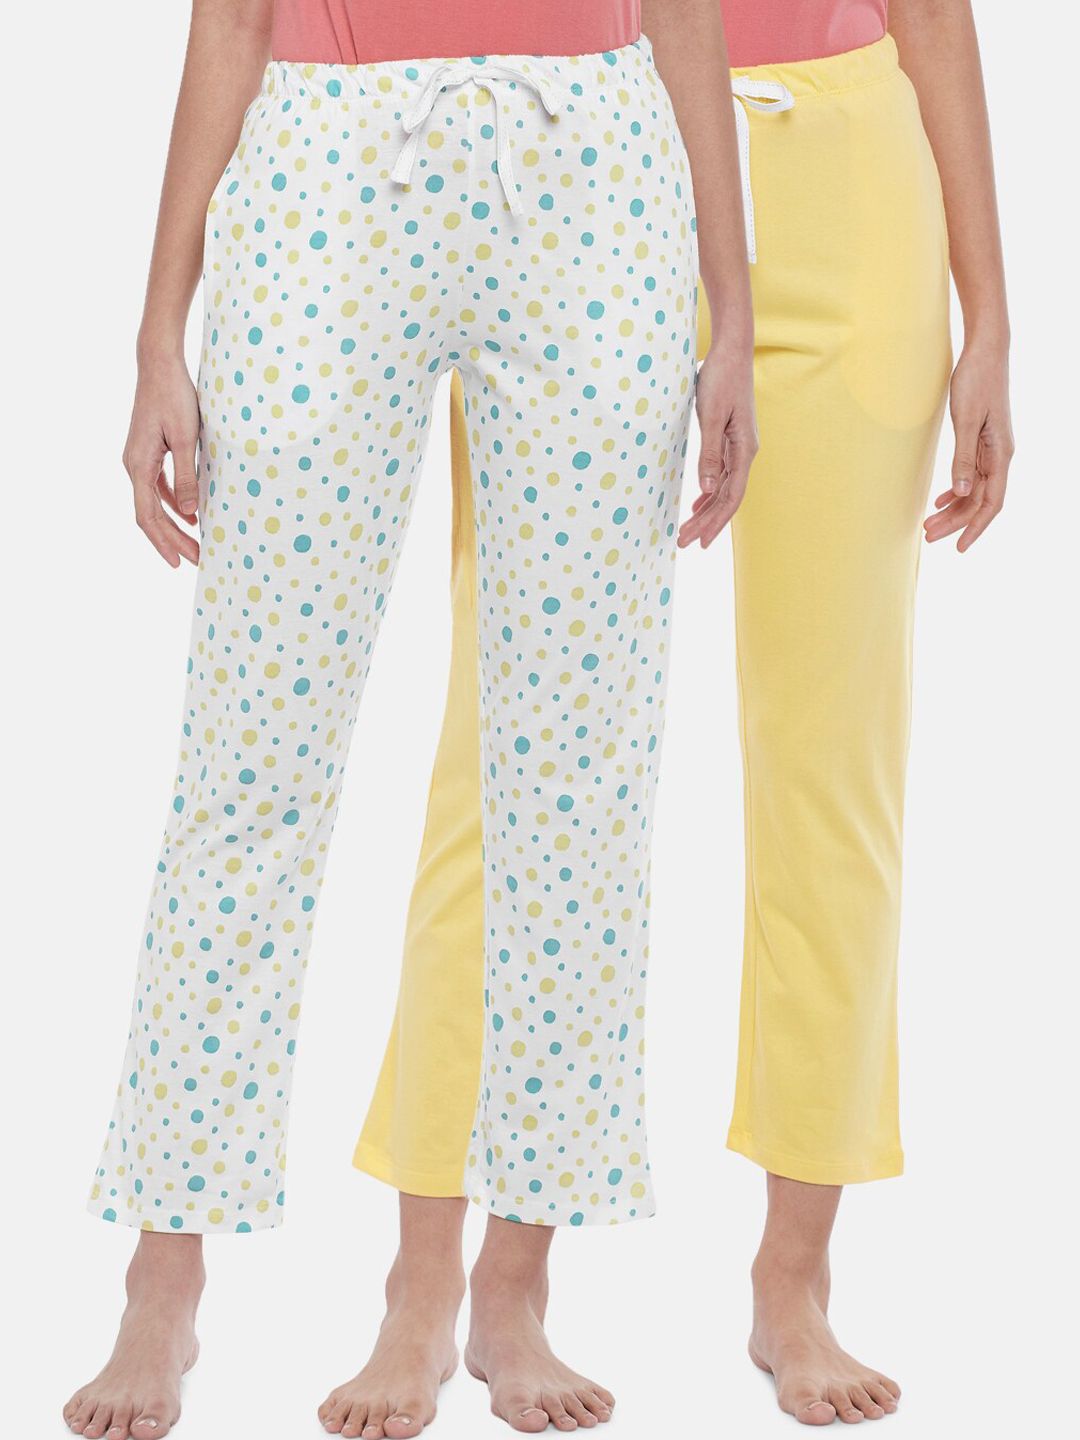 Dreamz by Pantaloons Pack of 2 White & Yellow Cotton Printed Lounge Pants Price in India